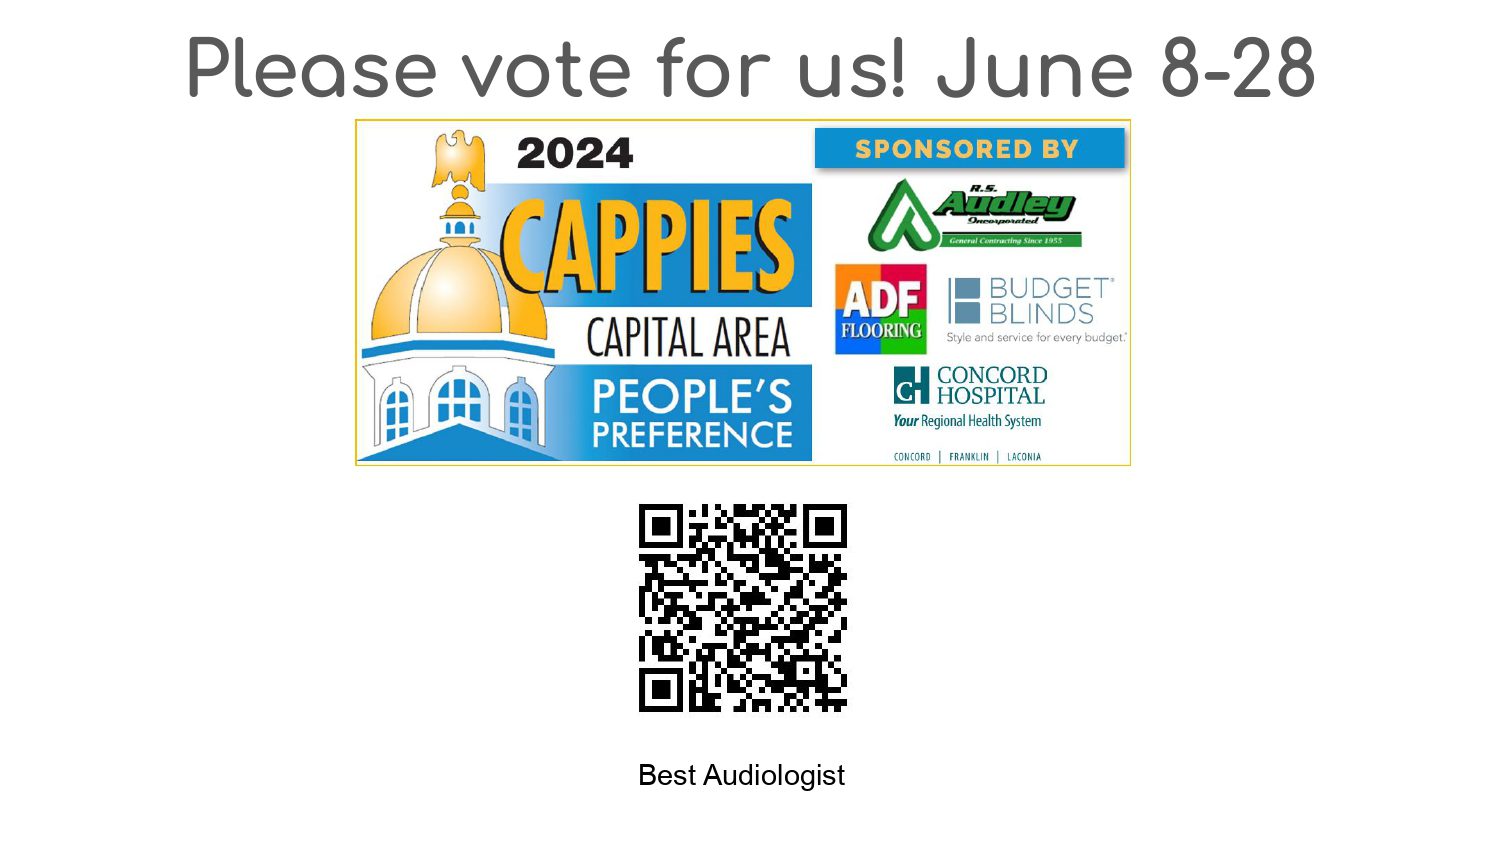 2022 Cappies Capital Area People's Preference. Scan the QR code with your phone or vote online. Show your support by voting for us in the first round of the 2022 Cappies! Round 1 is May 1 through May 31